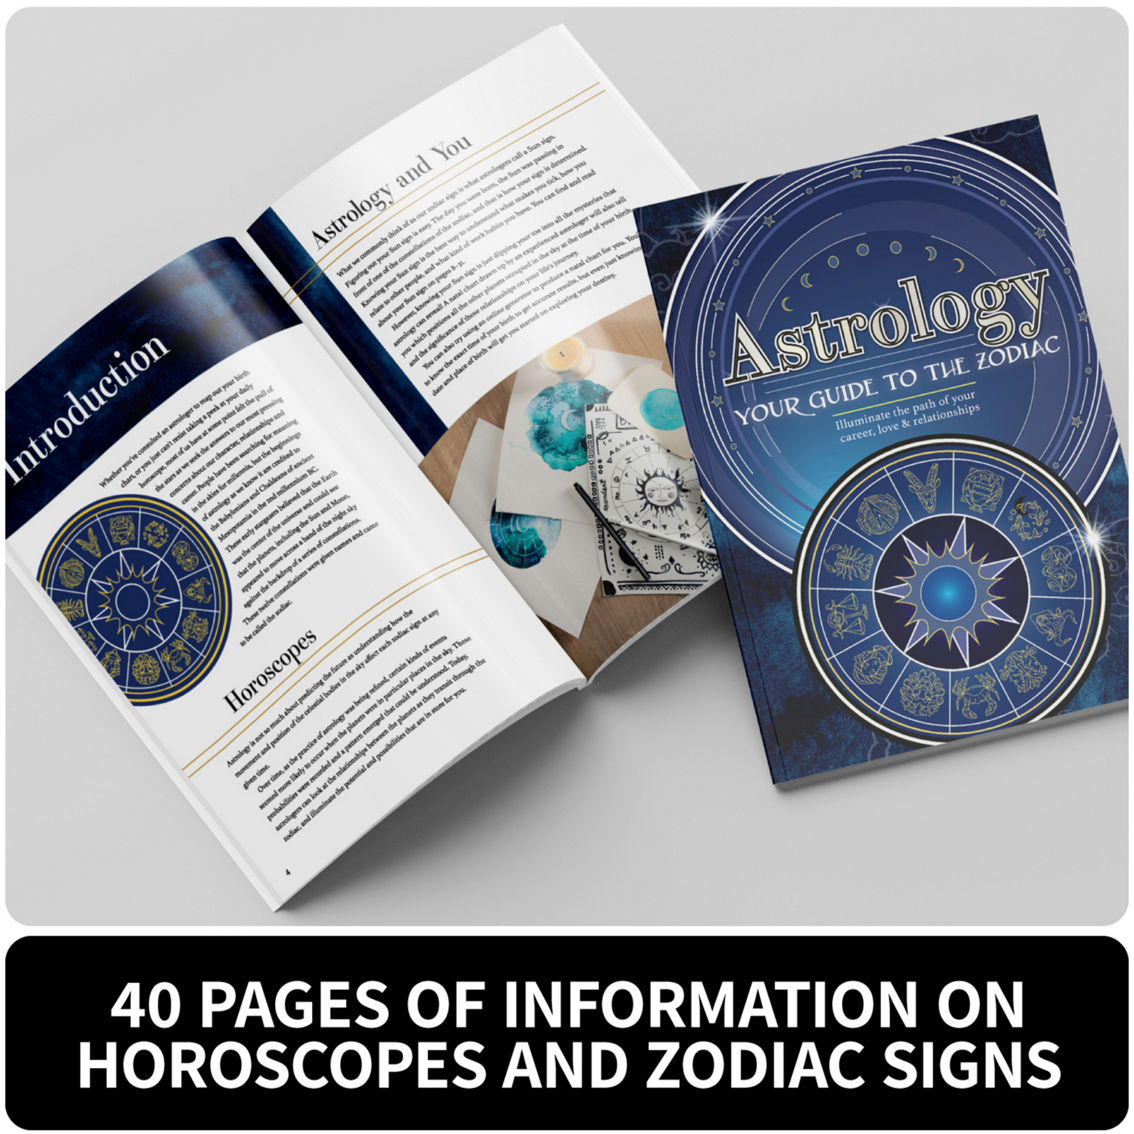 SpiceBox Gift Box: Astrology - Image 5 of 6